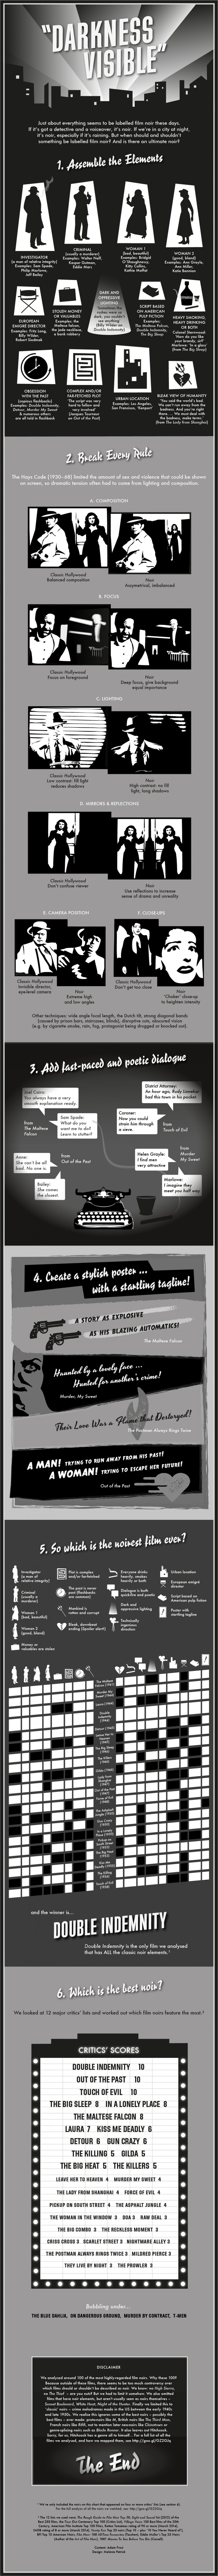 Darkness Visible: An Infographic of Film Noir